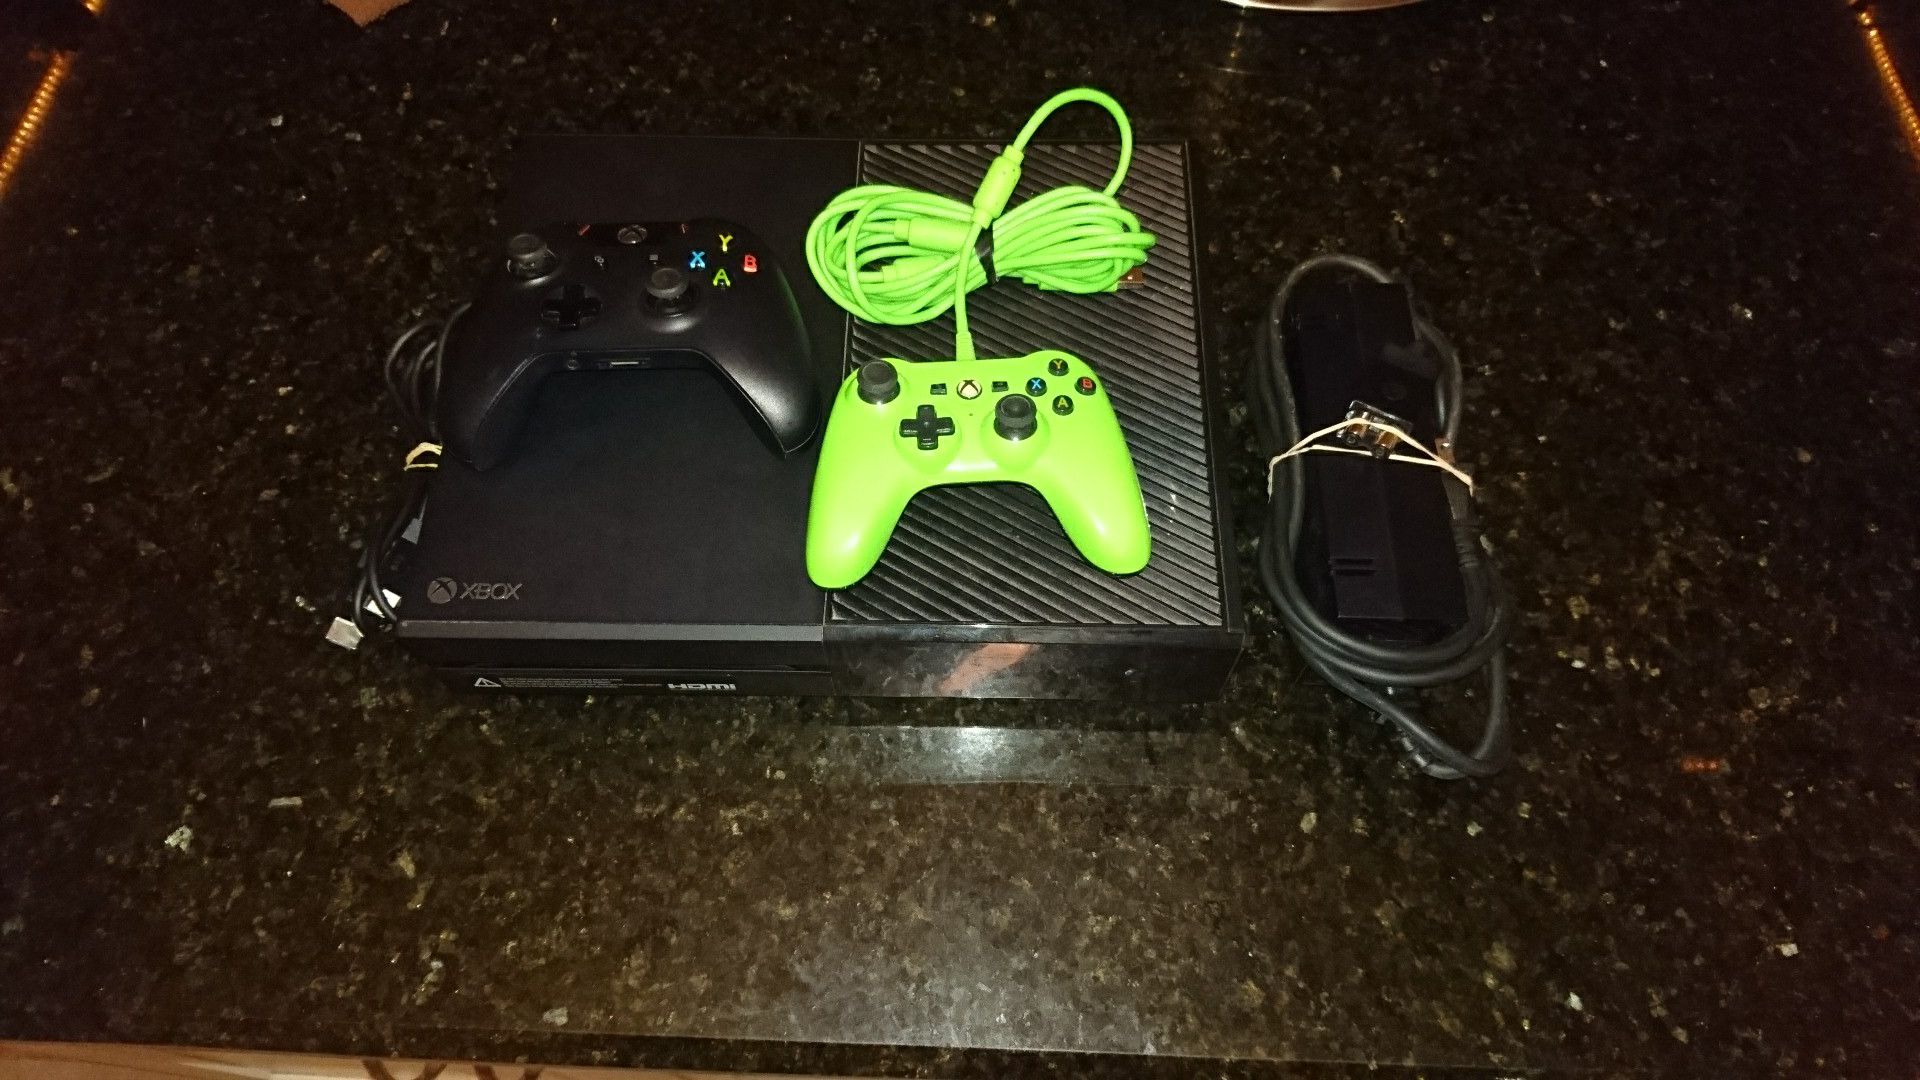 Xbox One 1TB console with 2 controllers and HDMI cable